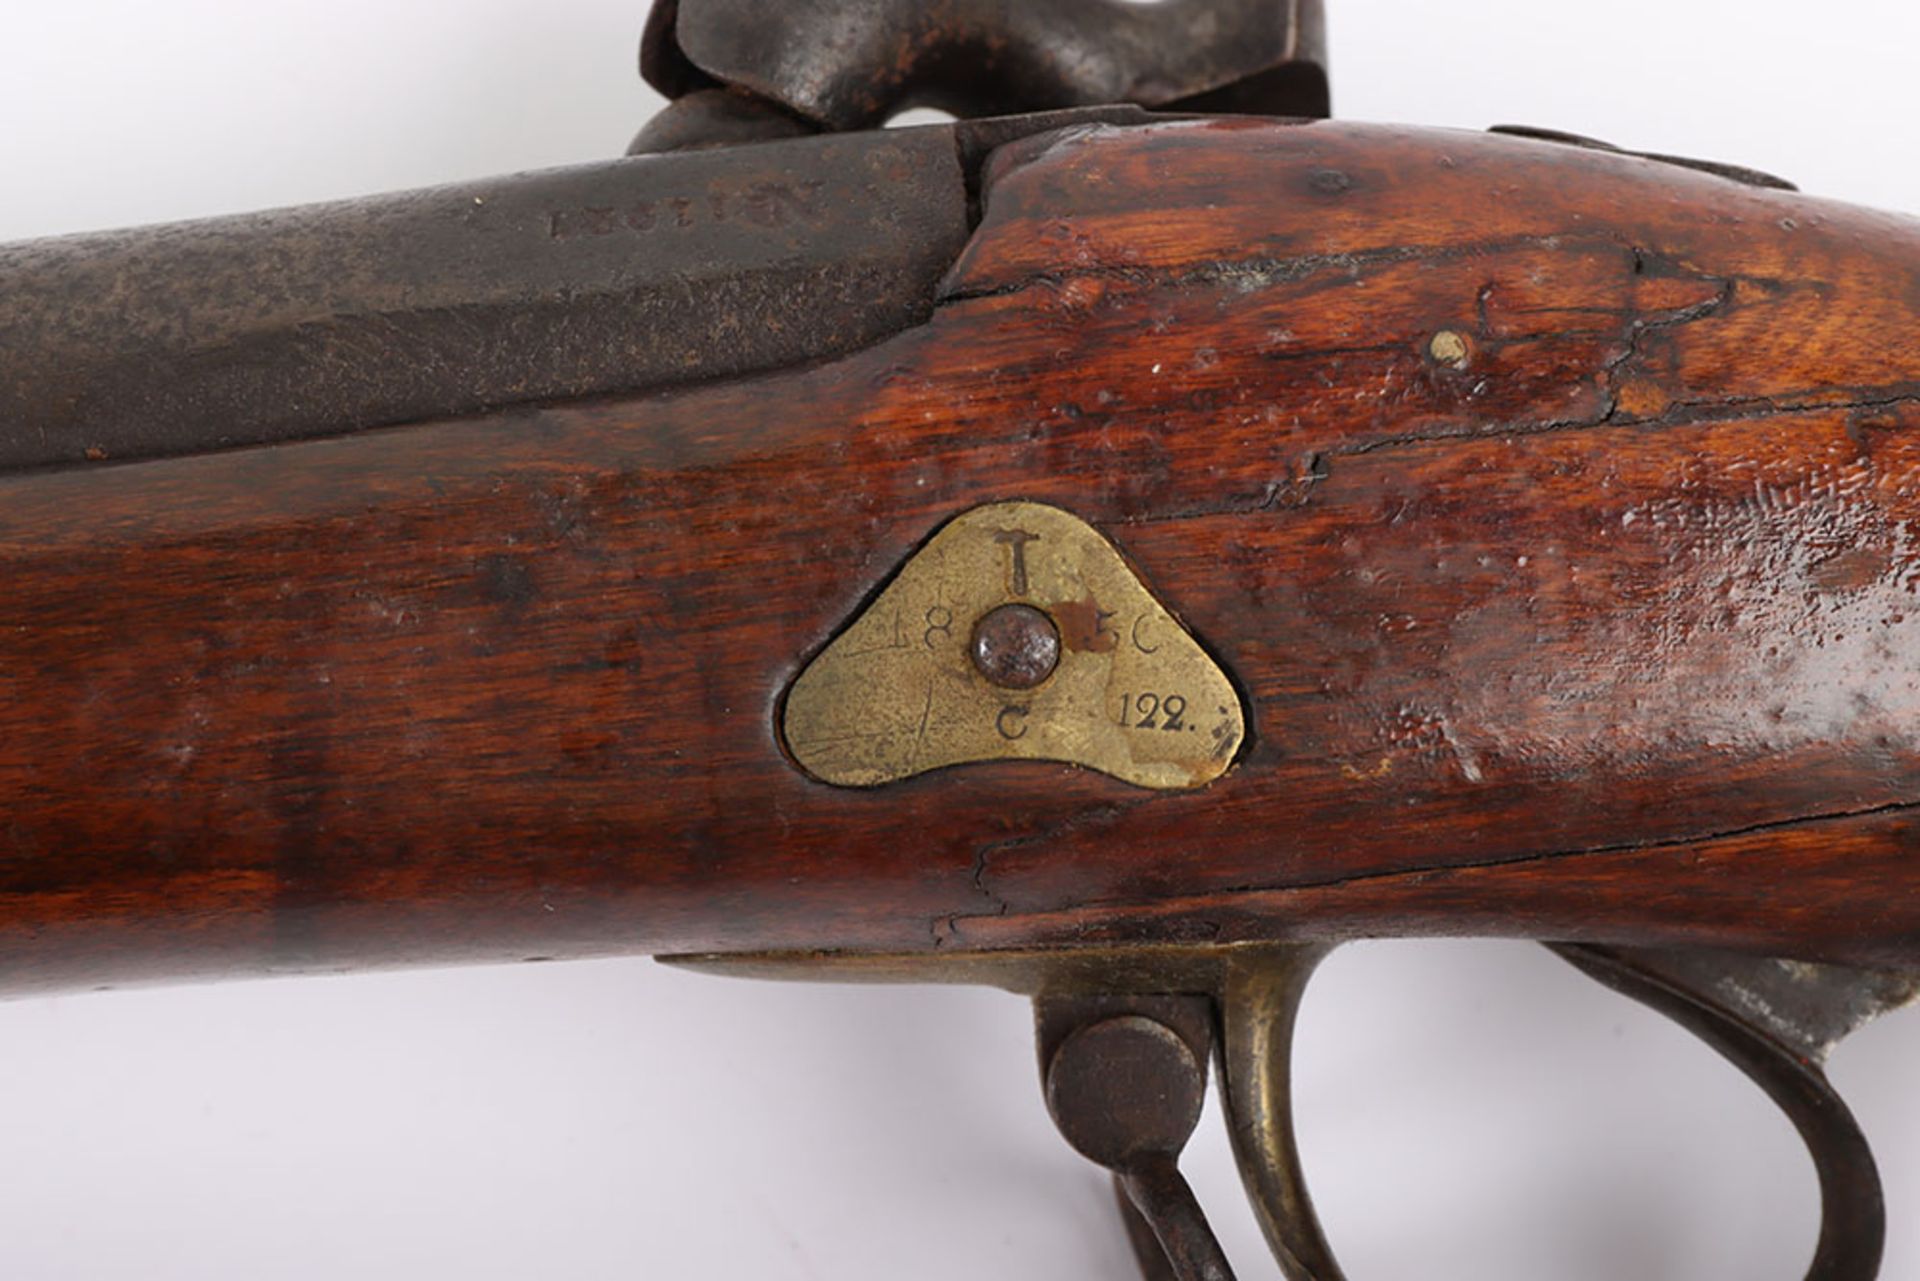 14-Bore Russian Back Action Military Musket - Image 17 of 17